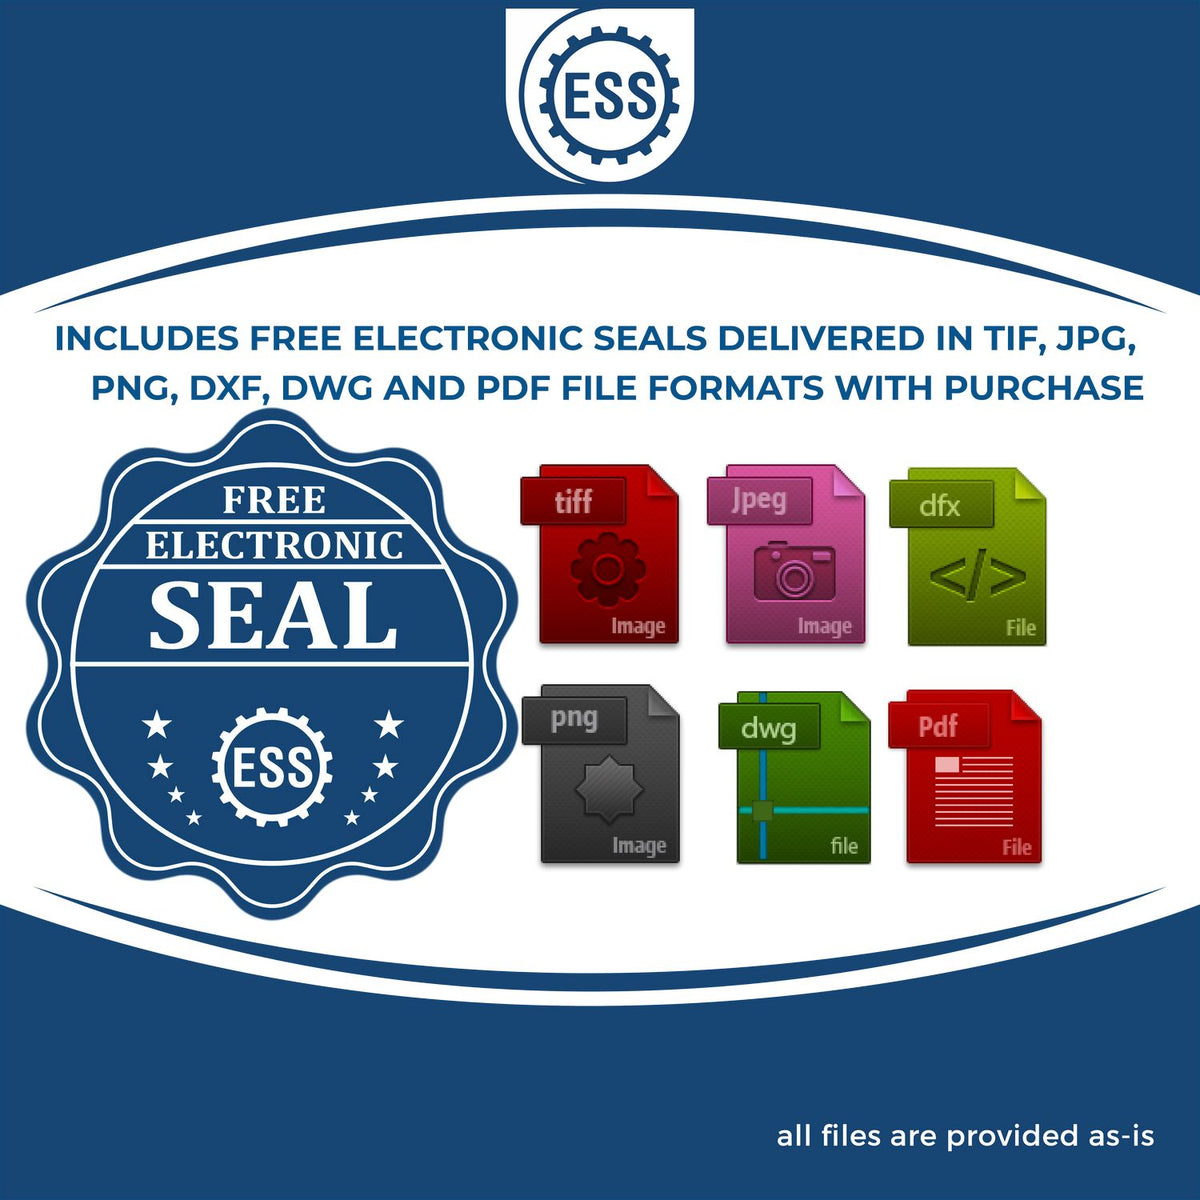 An infographic for the free electronic seal for the Long Reach Connecticut Land Surveyor Seal illustrating the different file type icons such as DXF, DWG, TIF, JPG and PNG.